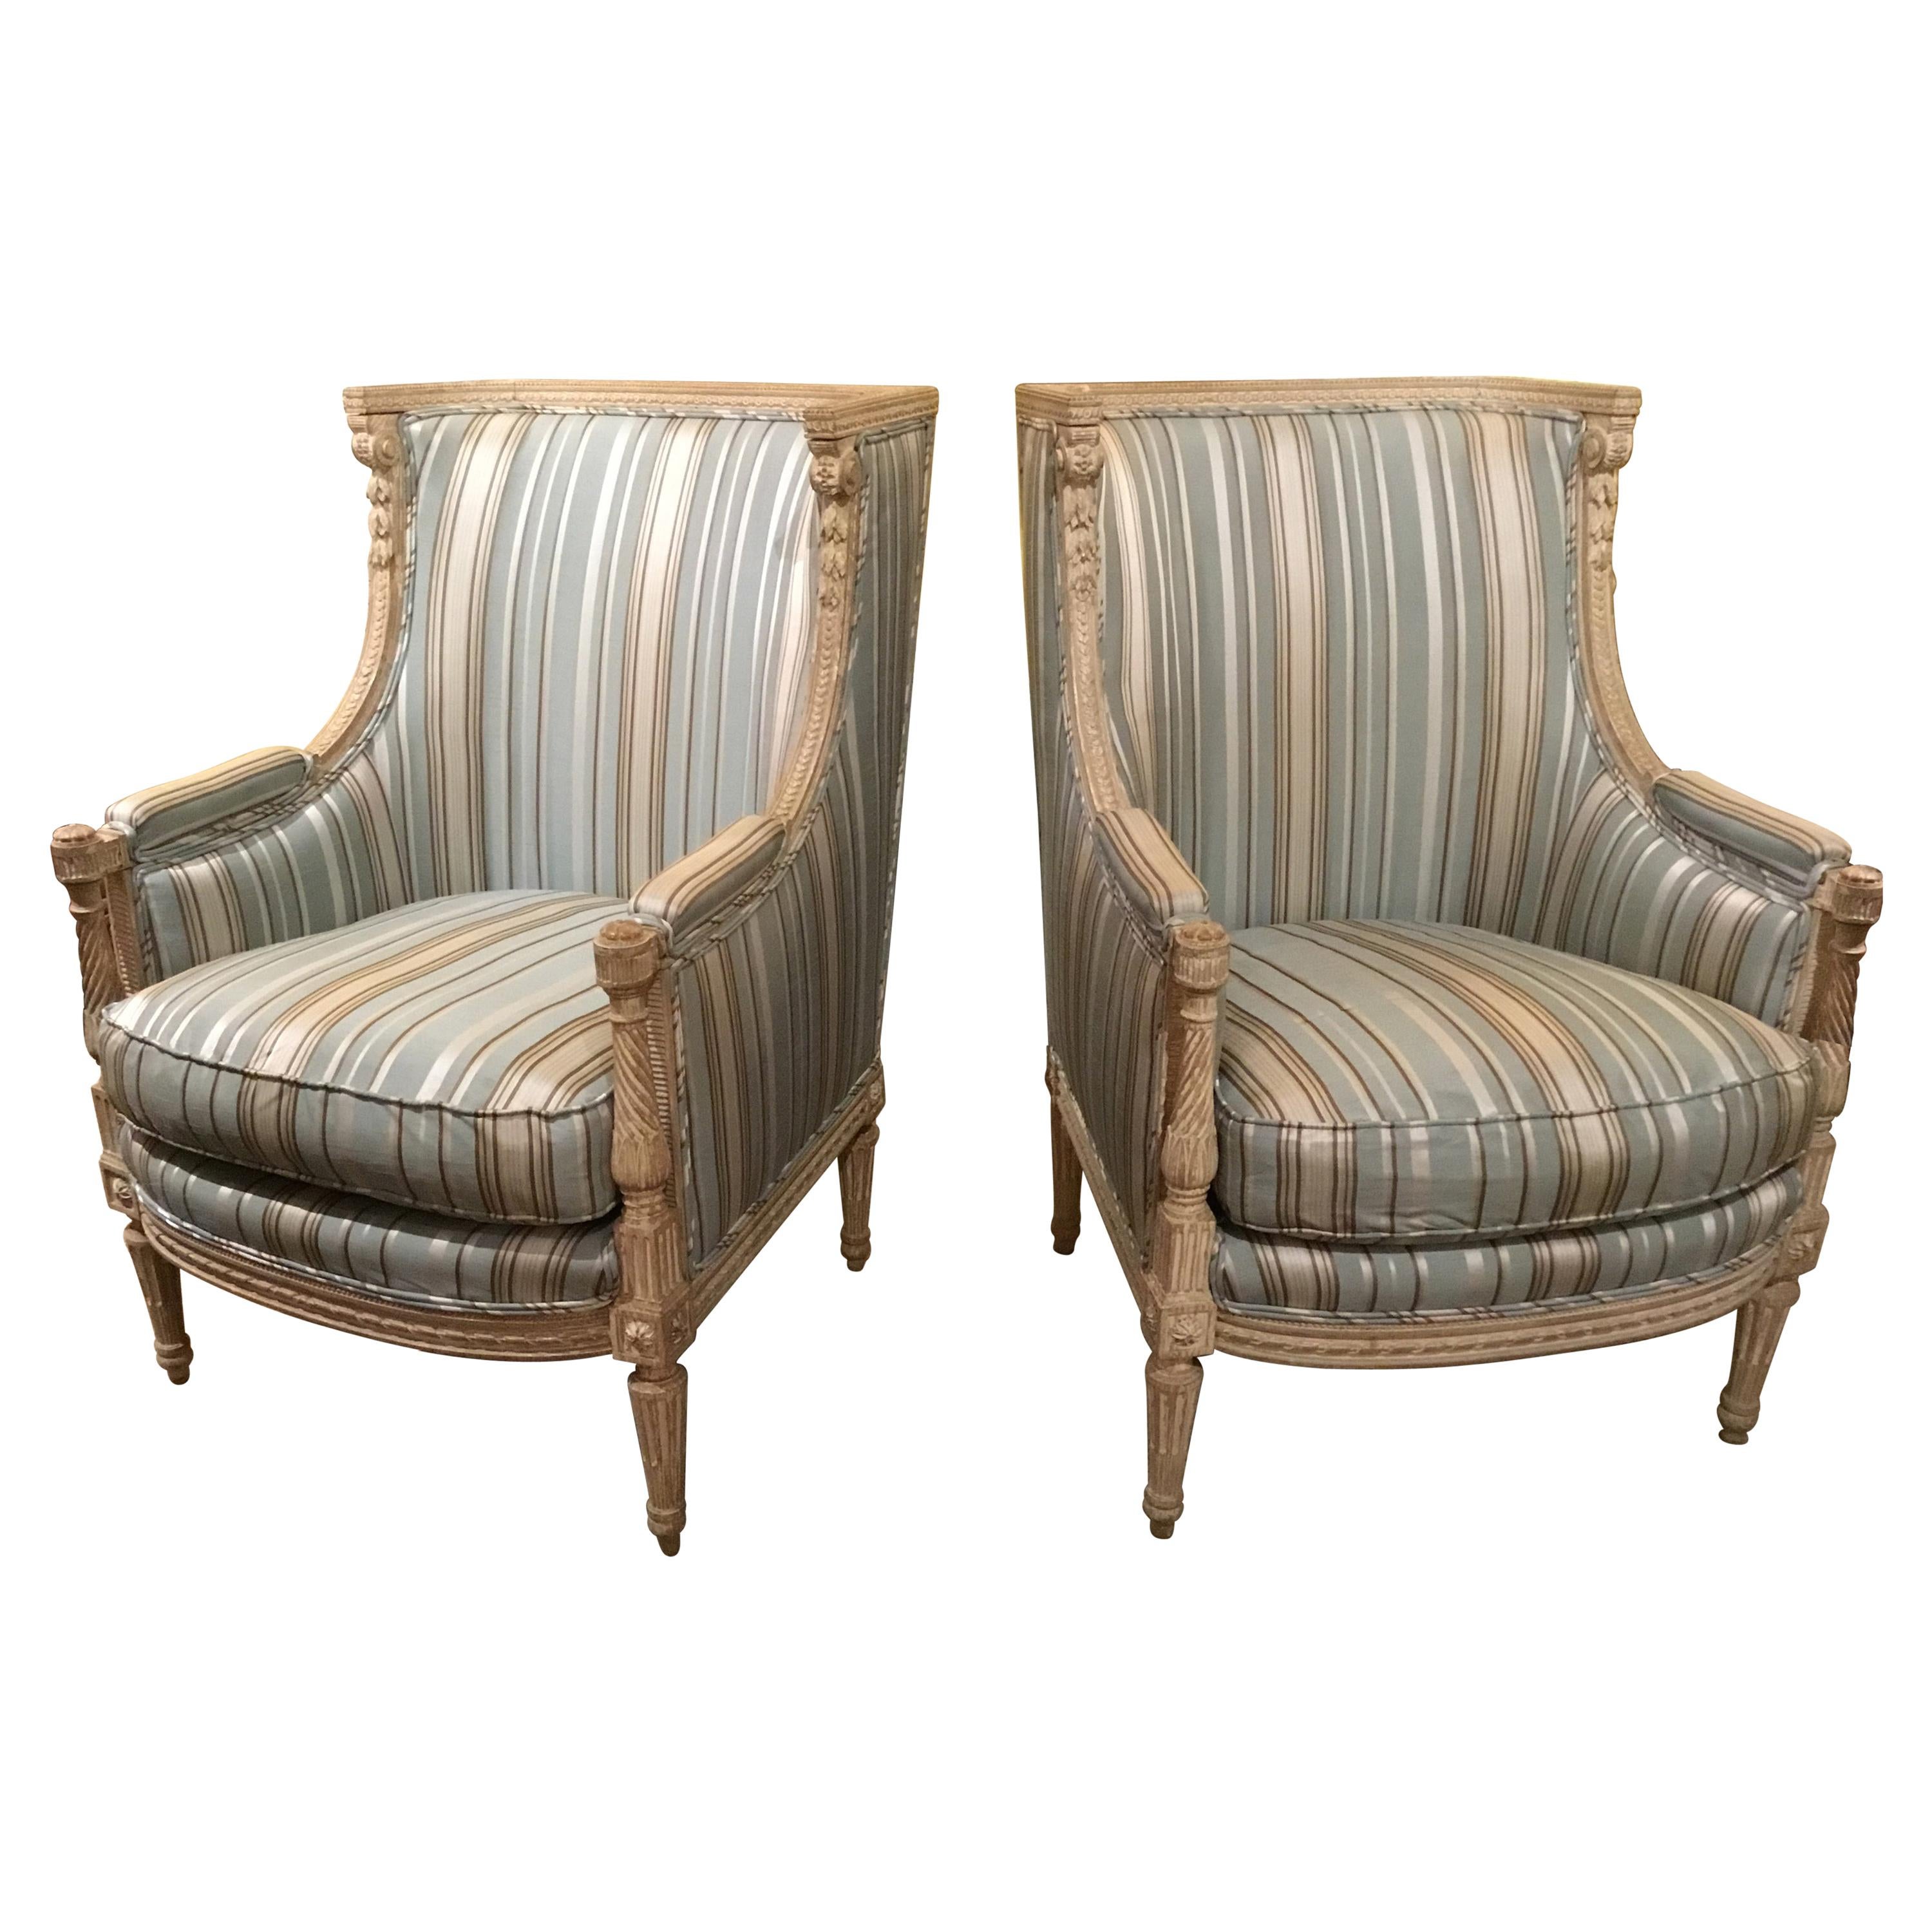 Pair of Louis XVI-Style Bergeres/Chairs, Late 19th Century in Polychrome Finish